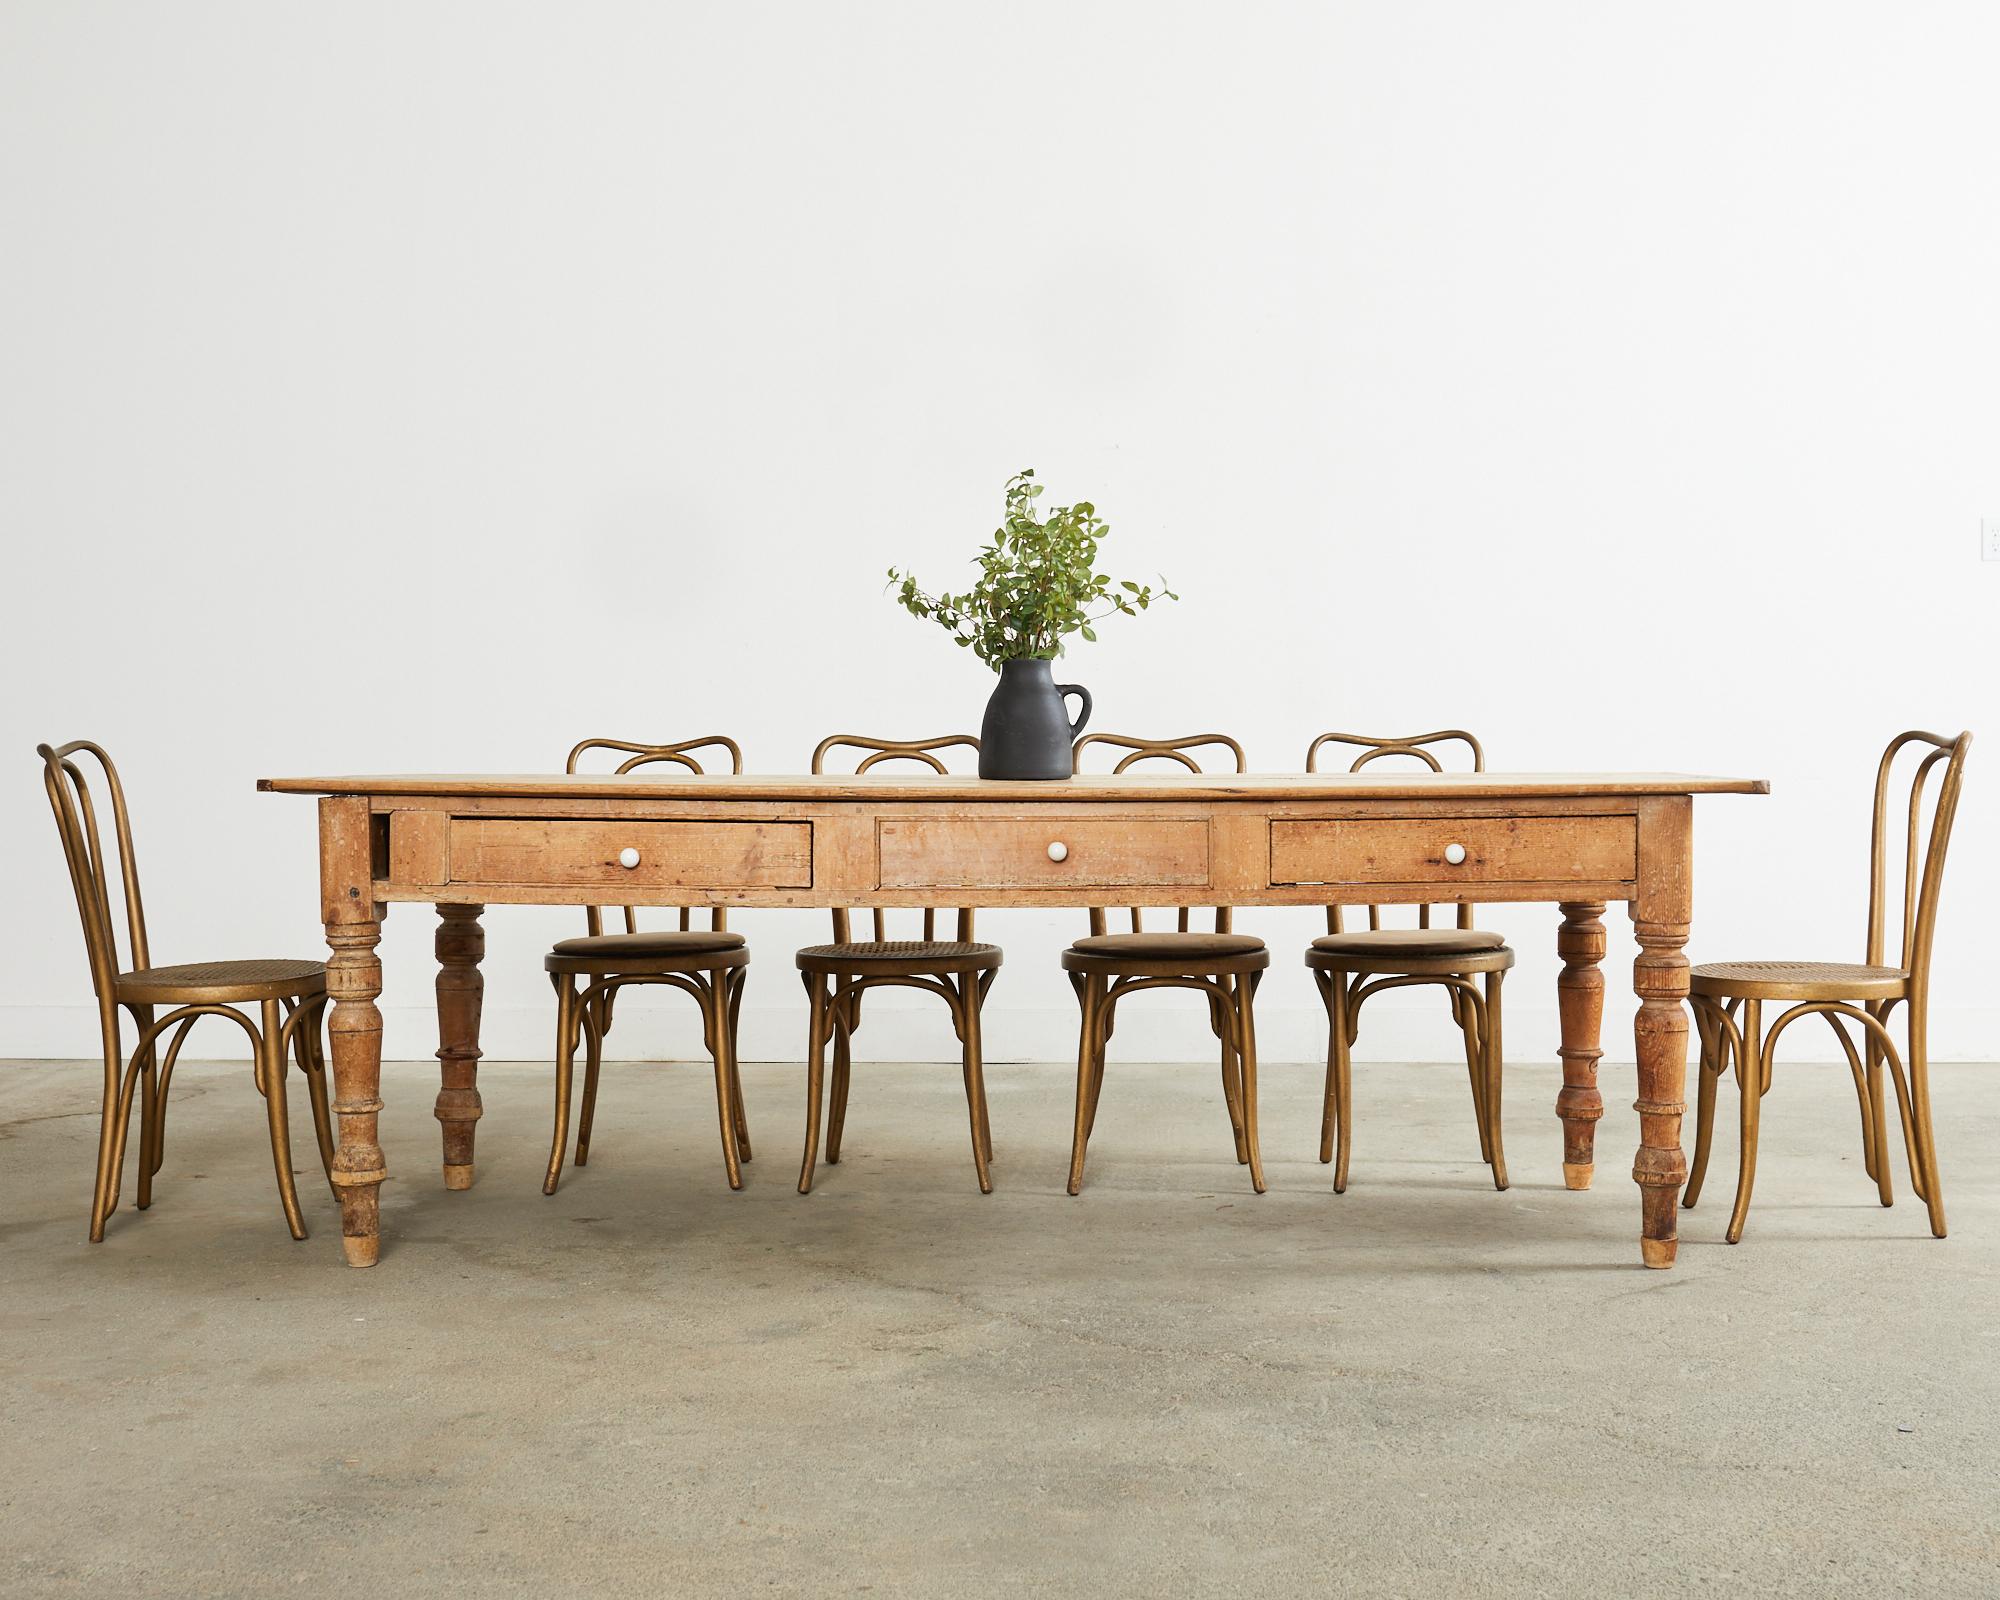 Gorgeous 19th century country English provincial style farmhouse dining table featuring a scrubbed, weathered patina. The plank top measures nearly 100 inches long with breadboard ends. The apron is fitted with two working storage drawers centered